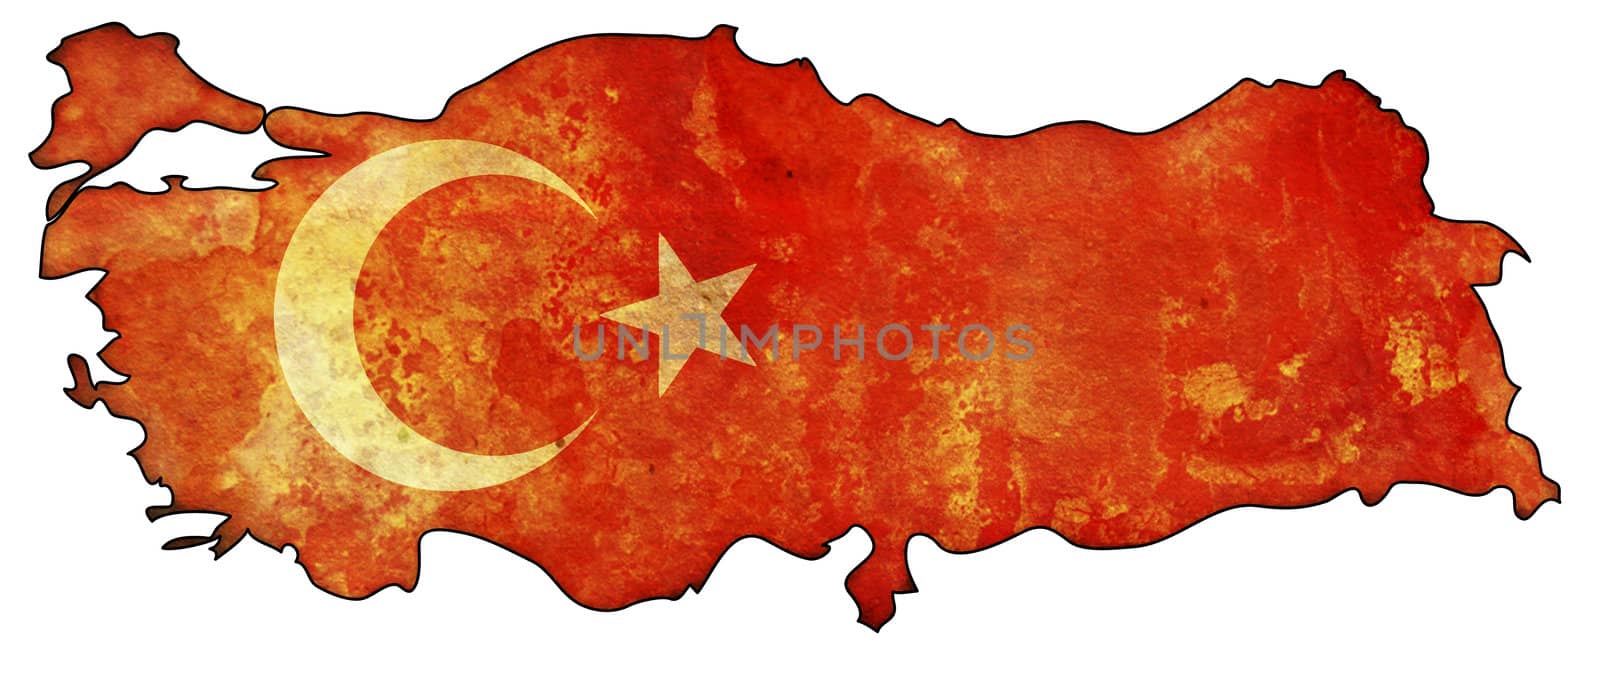 old map of turkey with flag on country territory